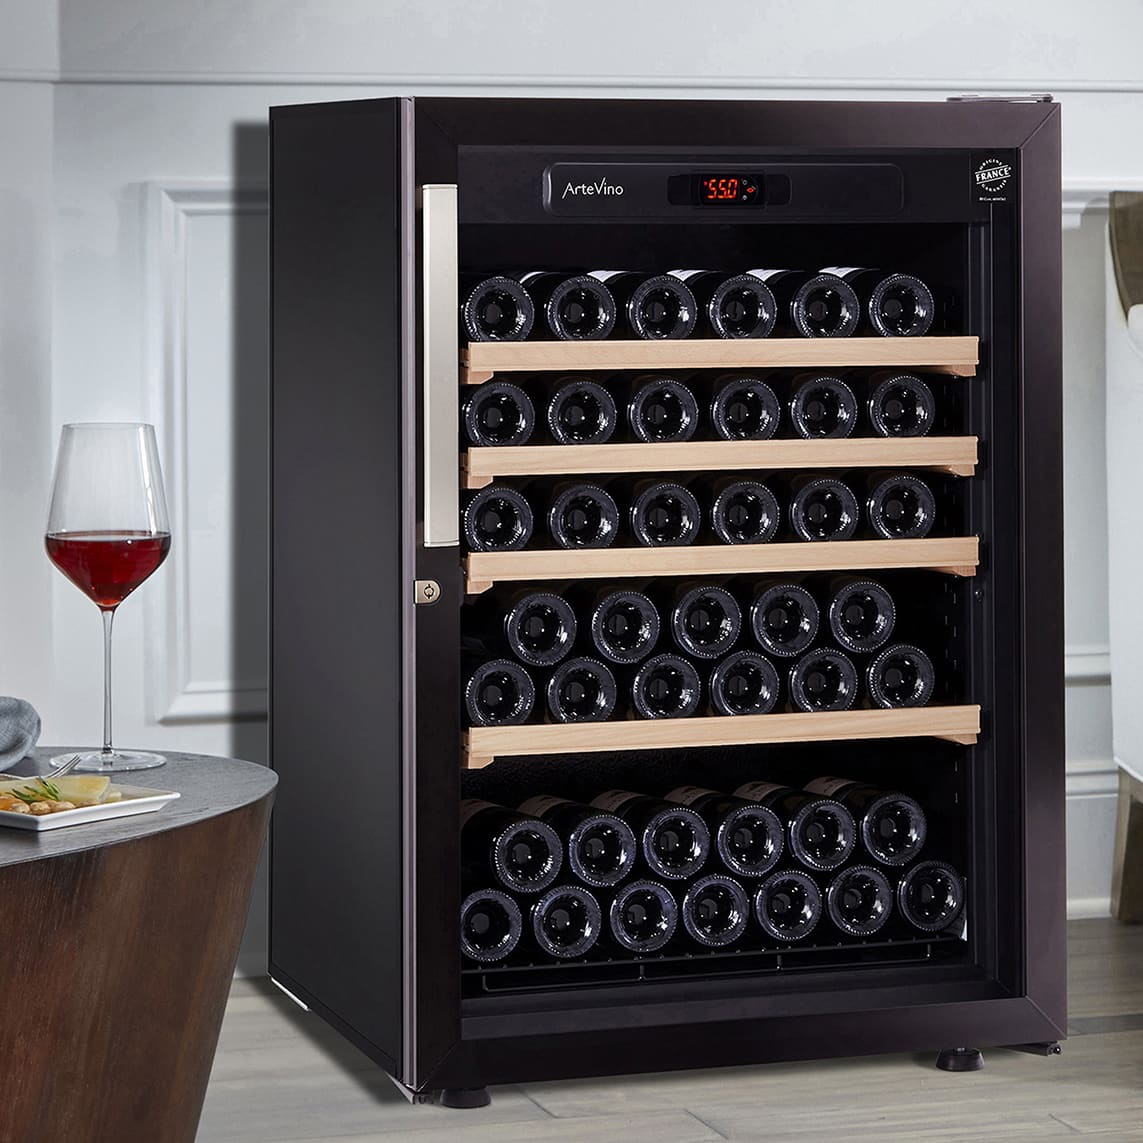 The Best Wine Coolers and Fridges to Store Your Bottles, According